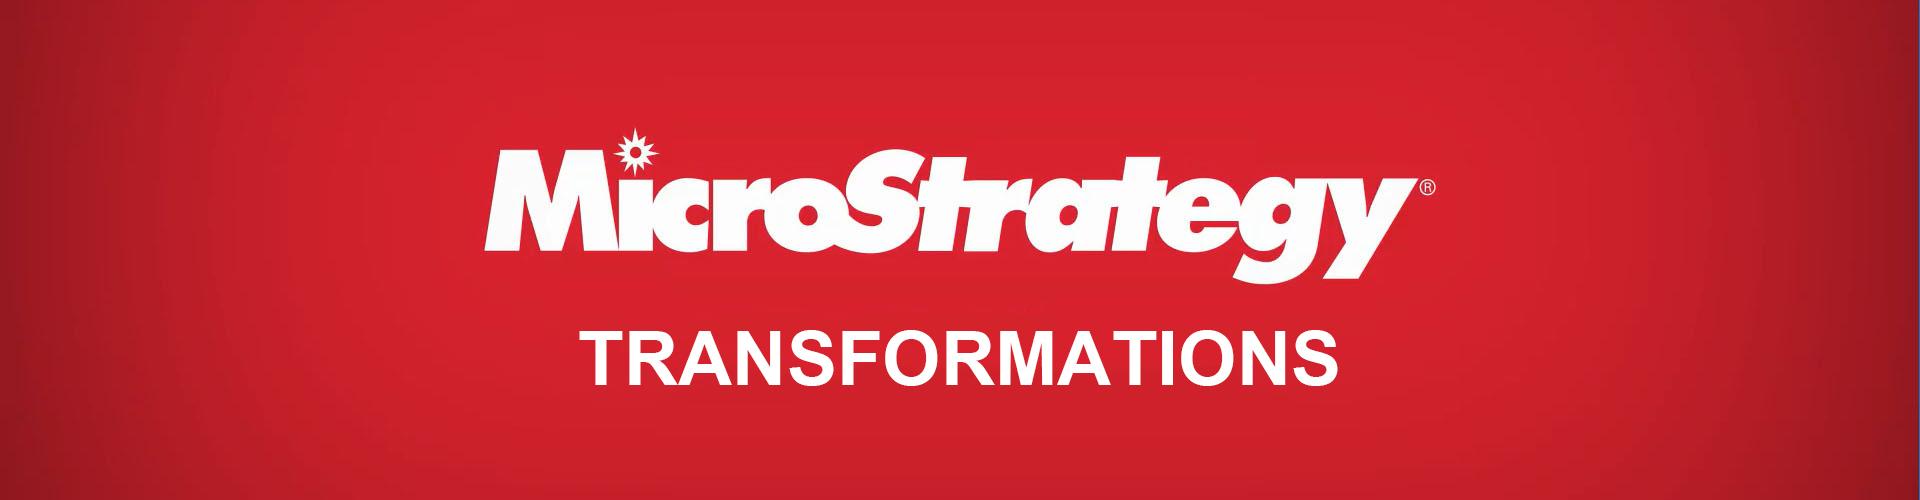 MicroStrategy Transformations